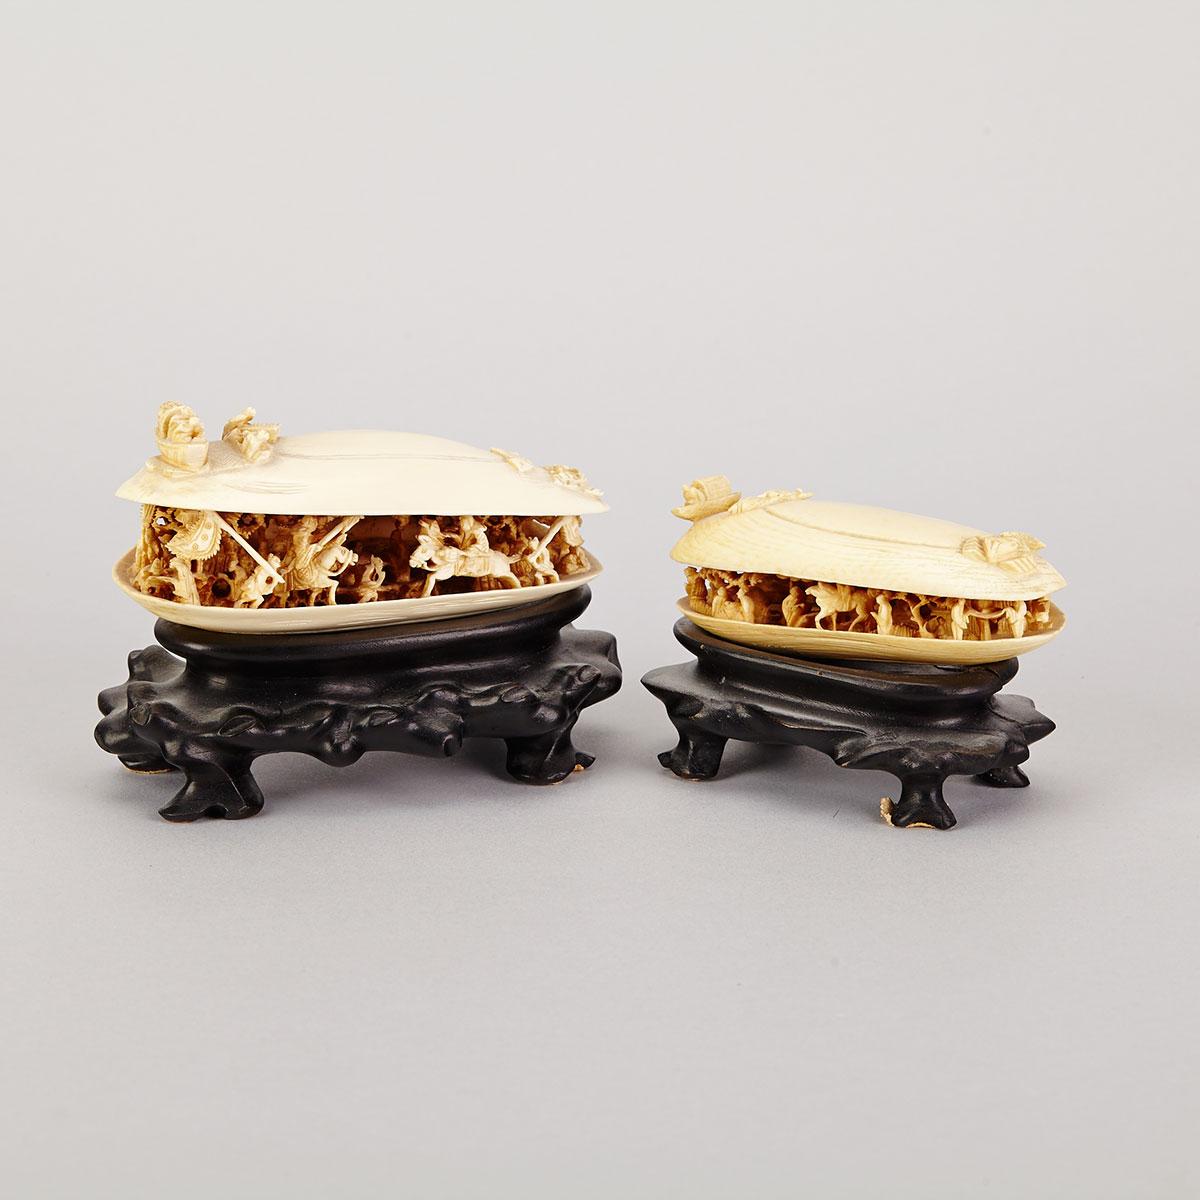 Two Ivory Carved Clams Dreams